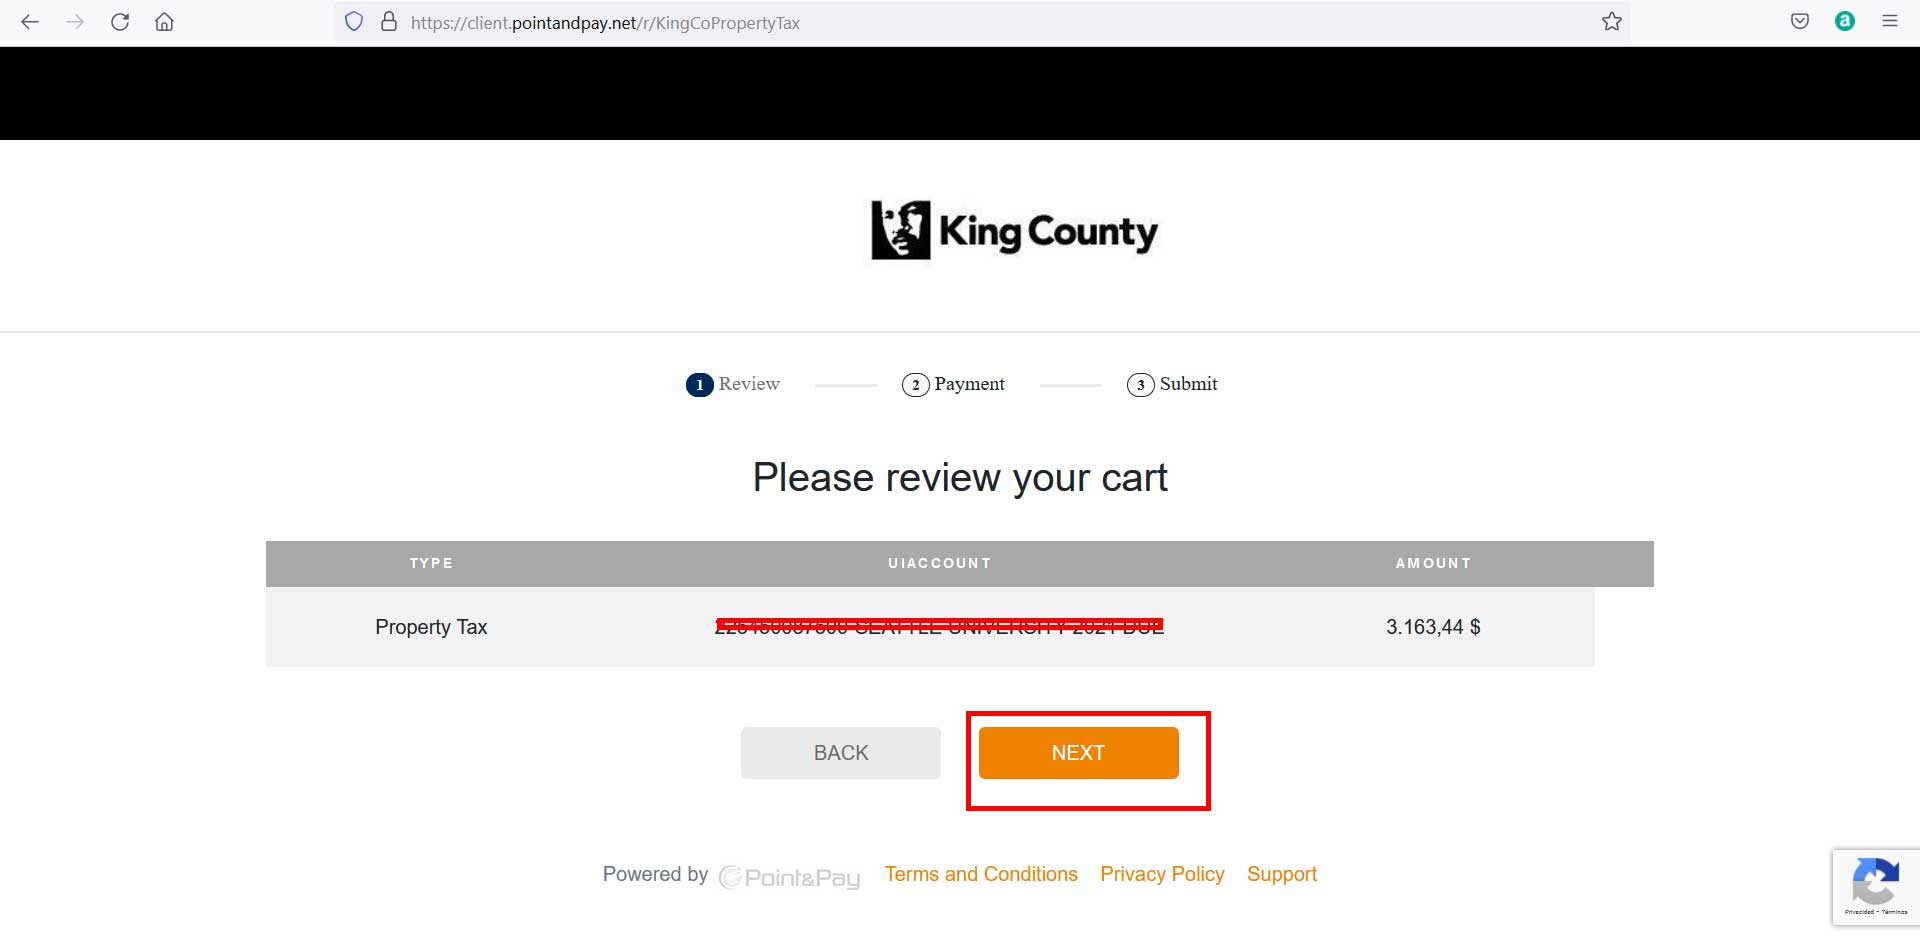 King County Payment Gateway